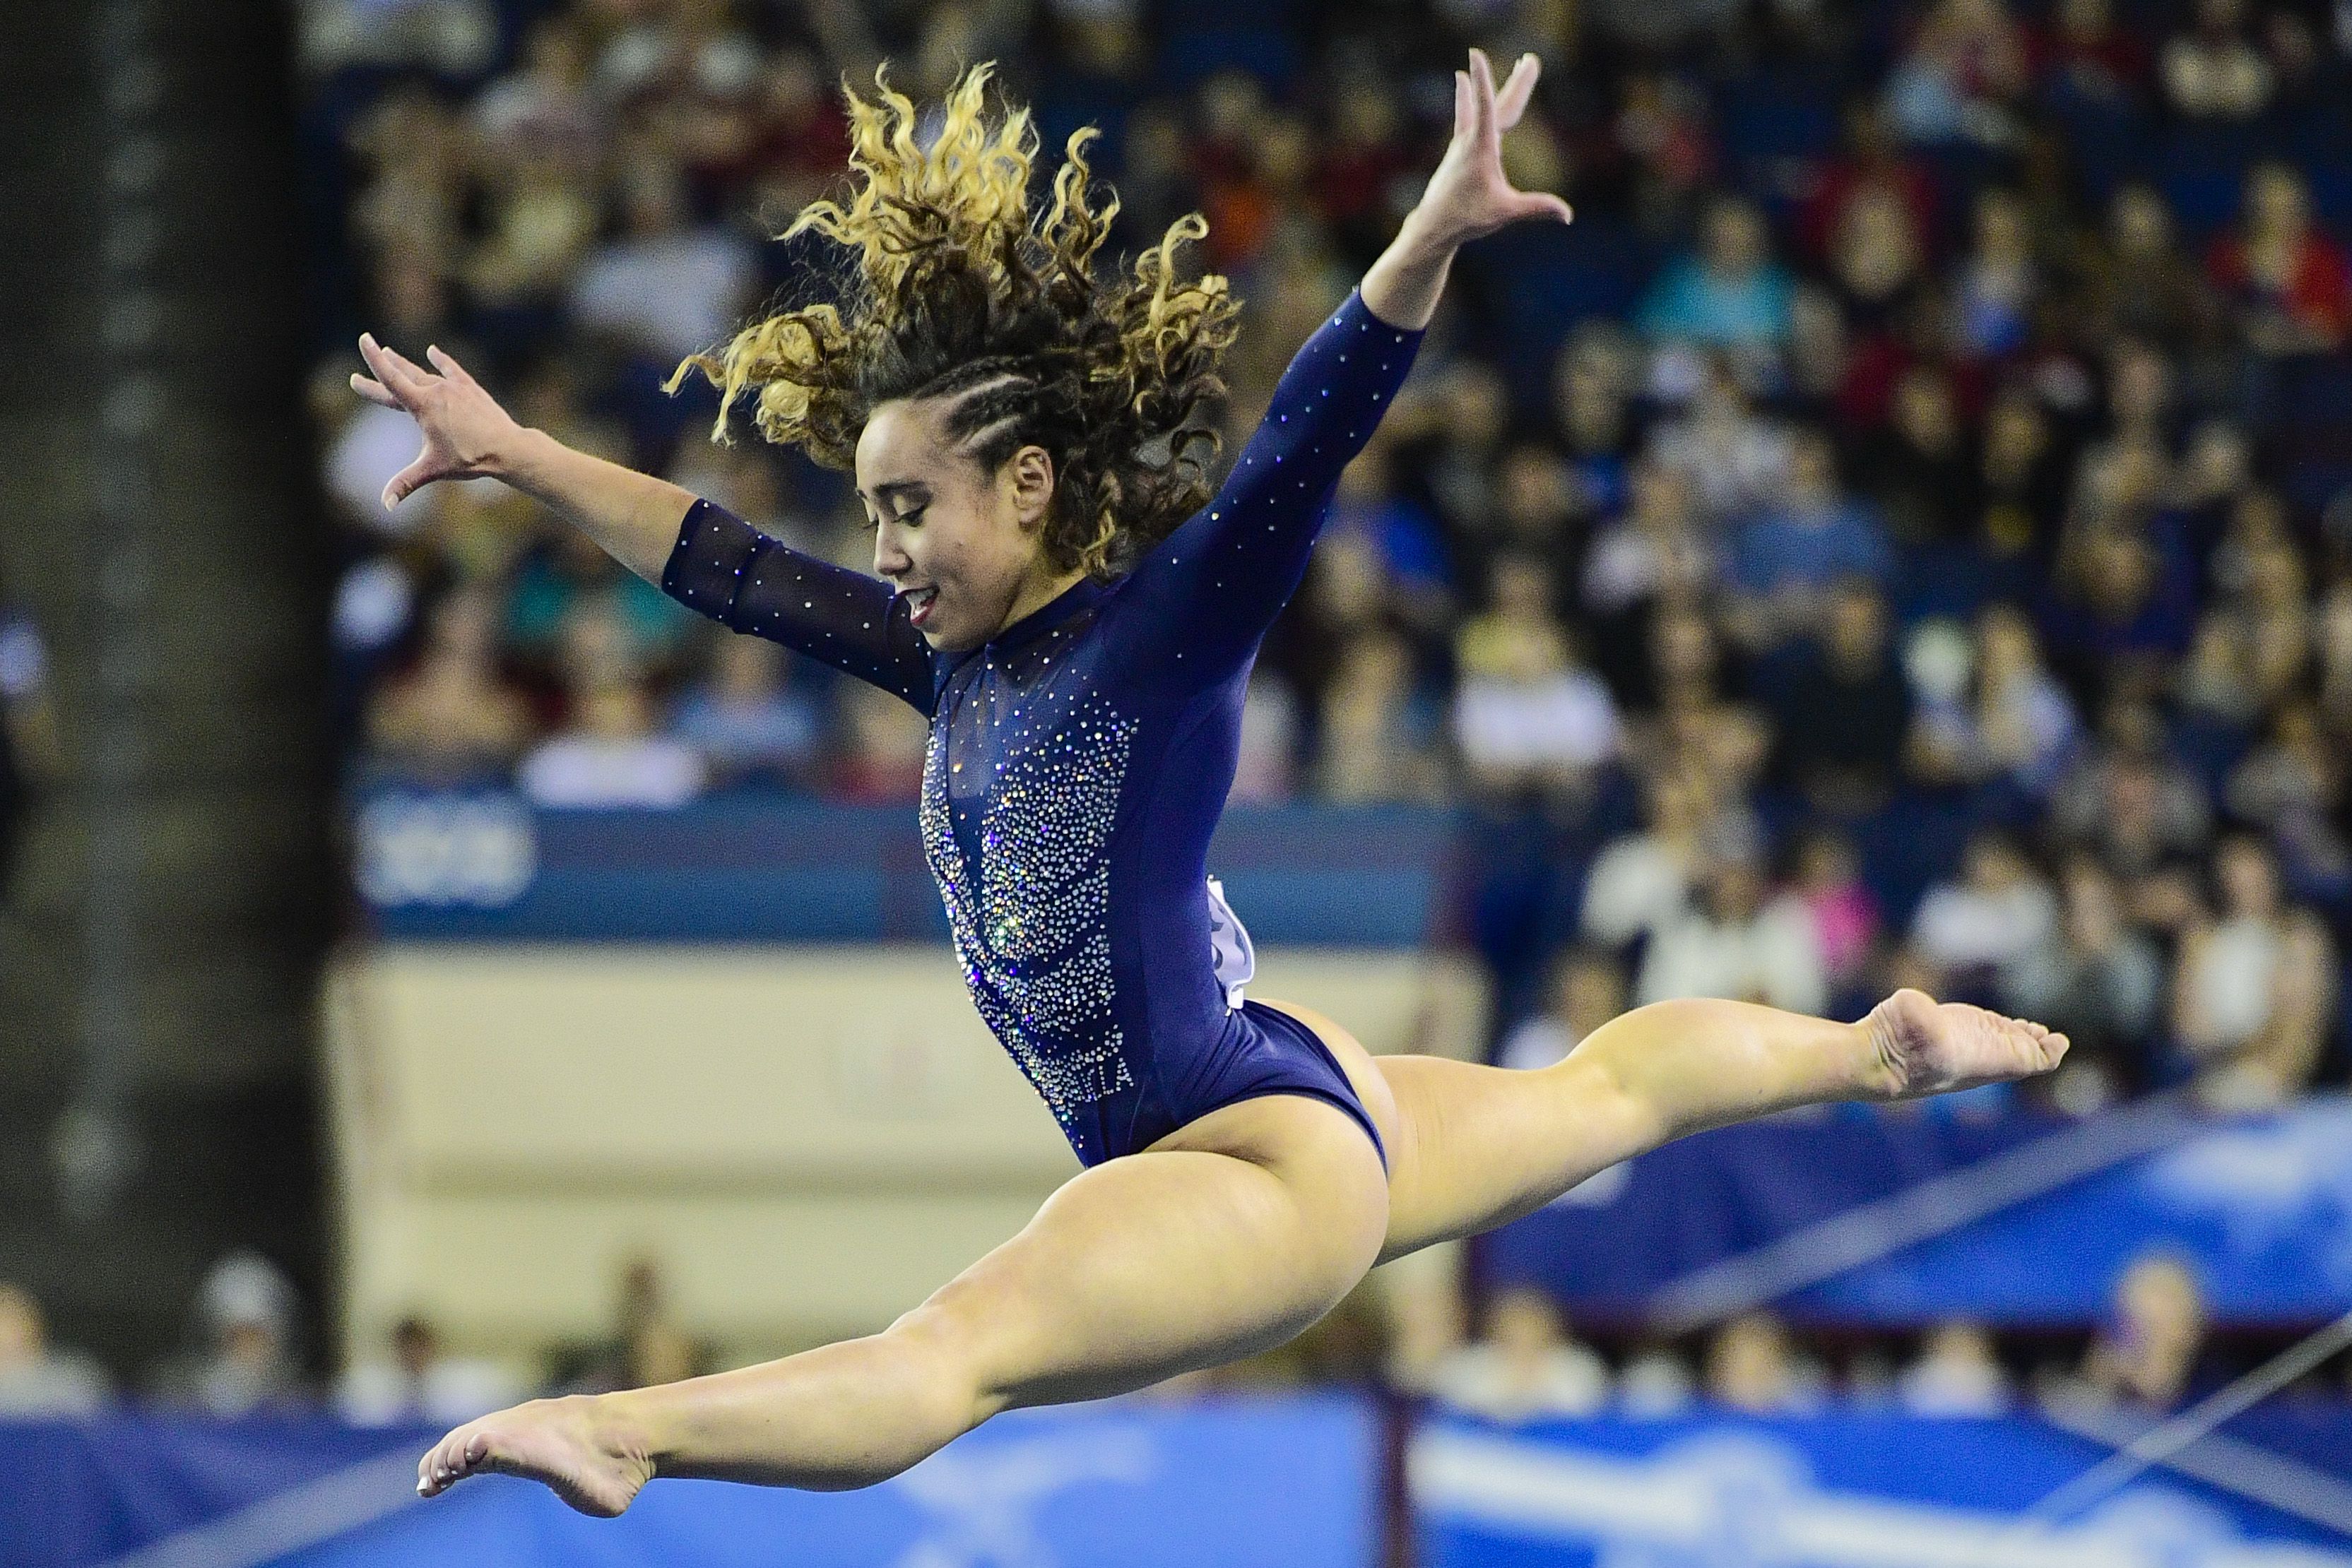 Gymnast Katelyn Ohashi Goes Viral For Taking Off Pants During